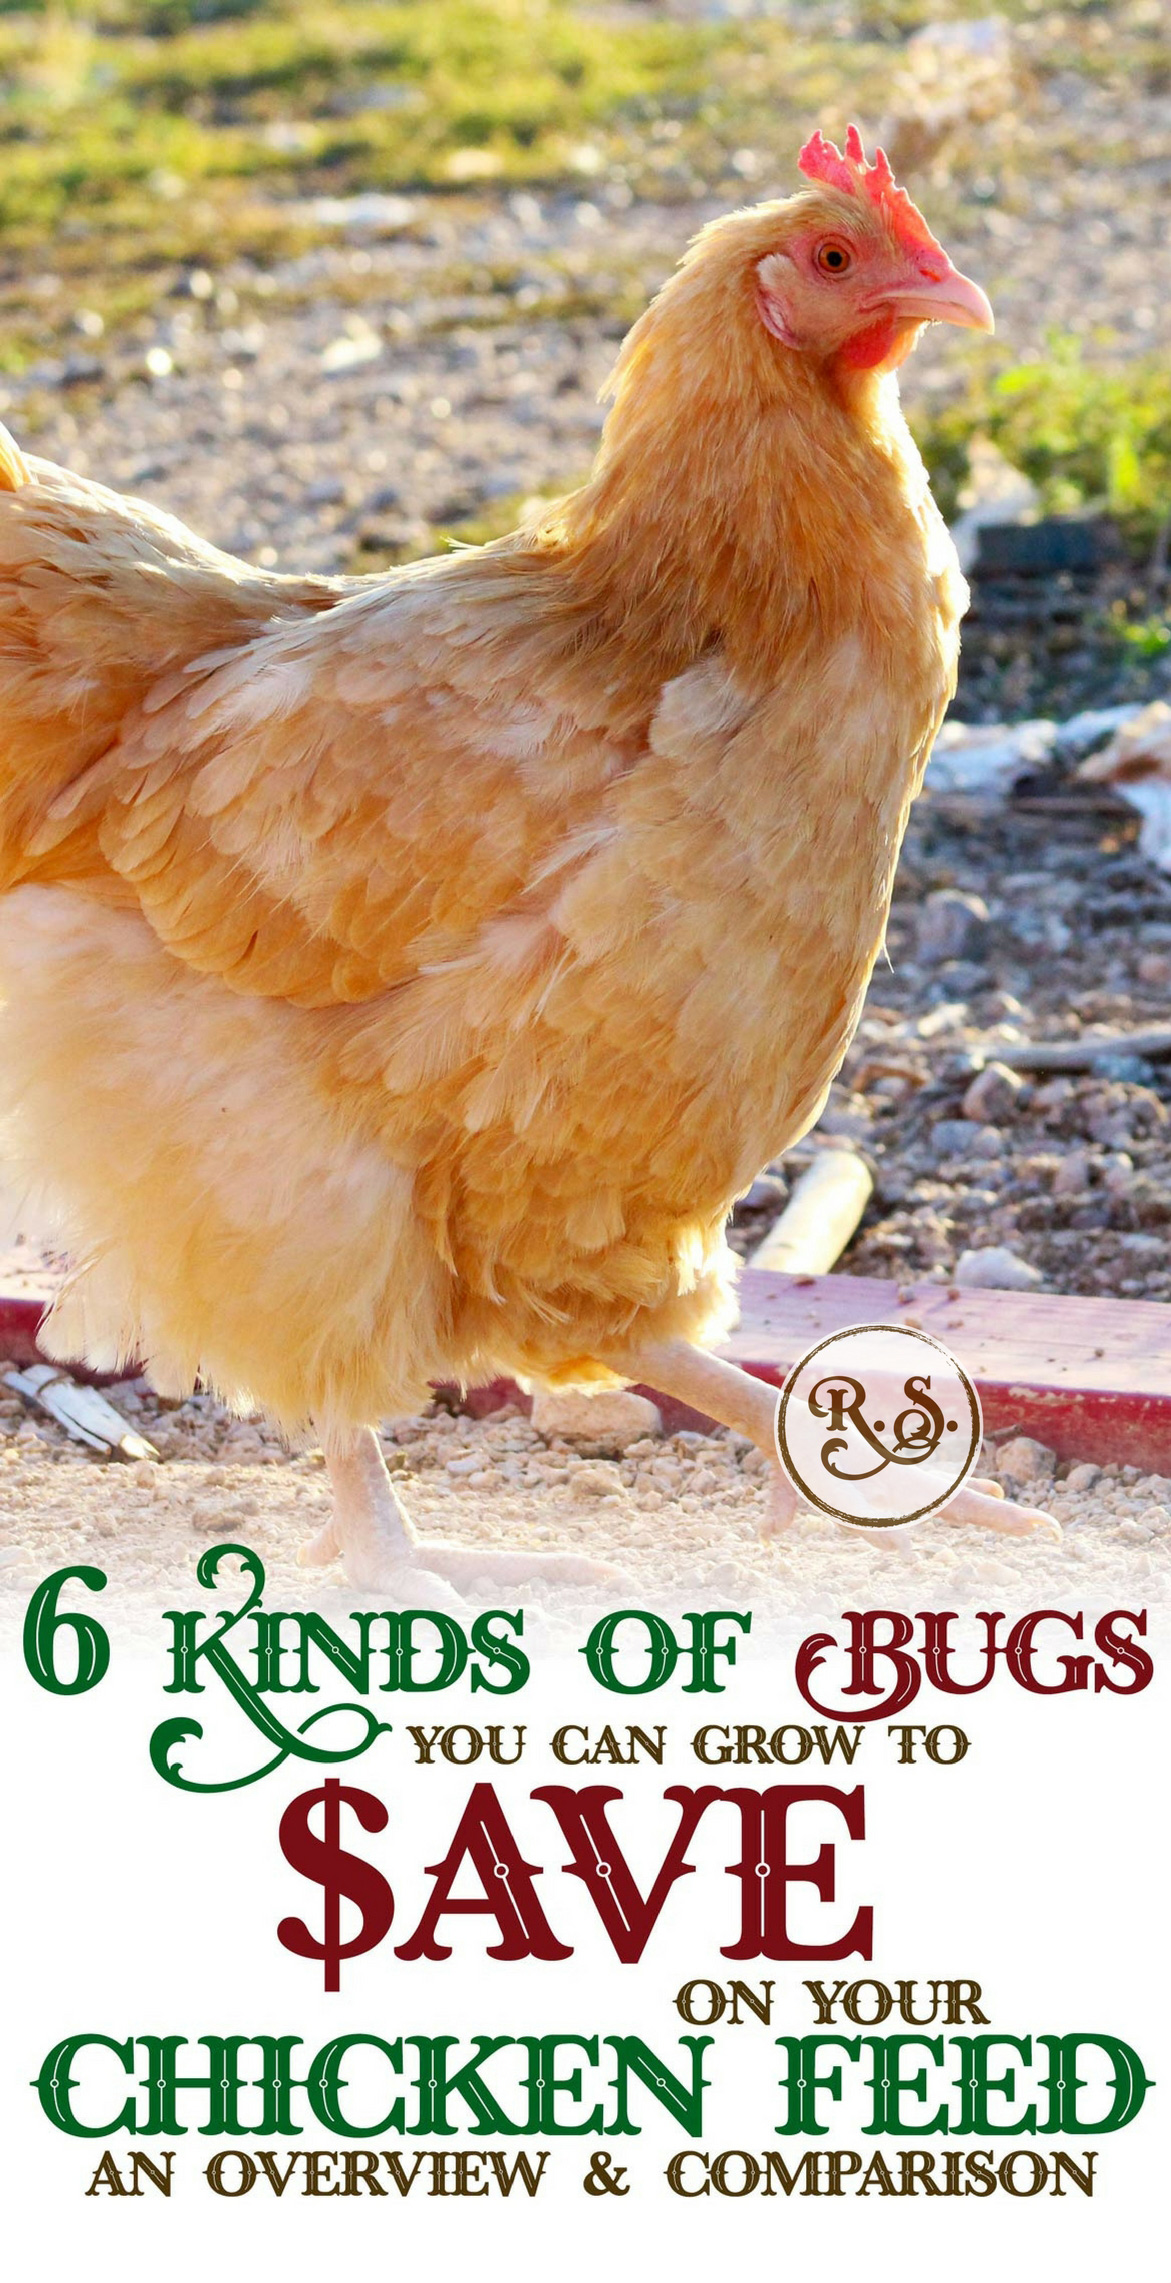 Cut your chicken feed bill by growing bugs. Here’s an overview to help you decide which bugs are best for your chickens. Be more self-sufficient by raising your own chicken food.